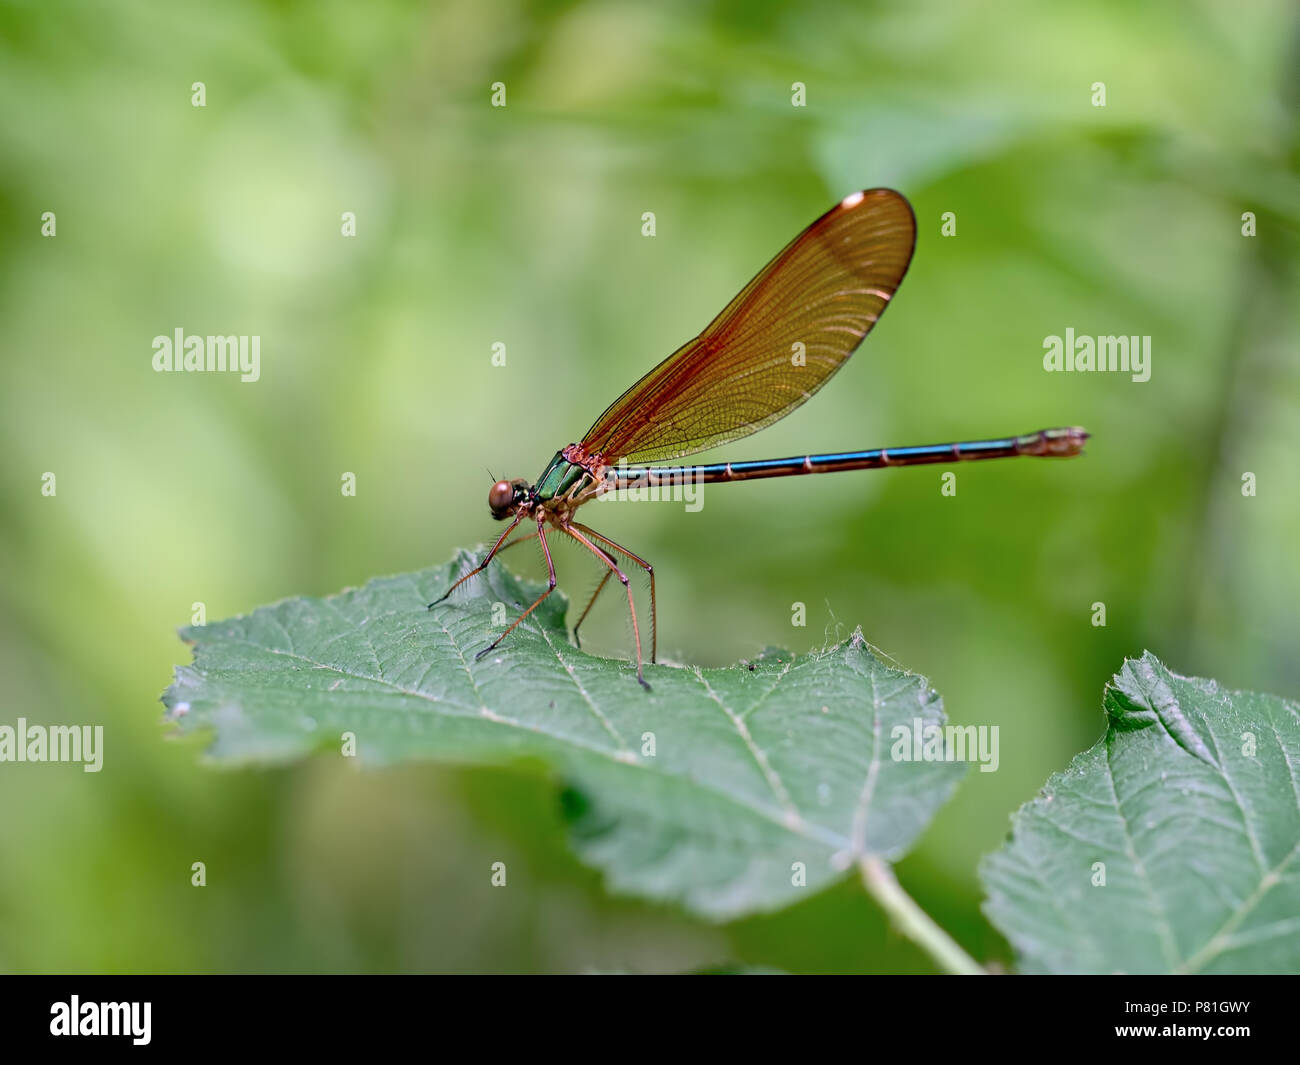 The beautiful demoiselle, Calopteryx virgo, is a European damselfly belonging to the family Calopterygidae. Female on leaf. Stock Photo